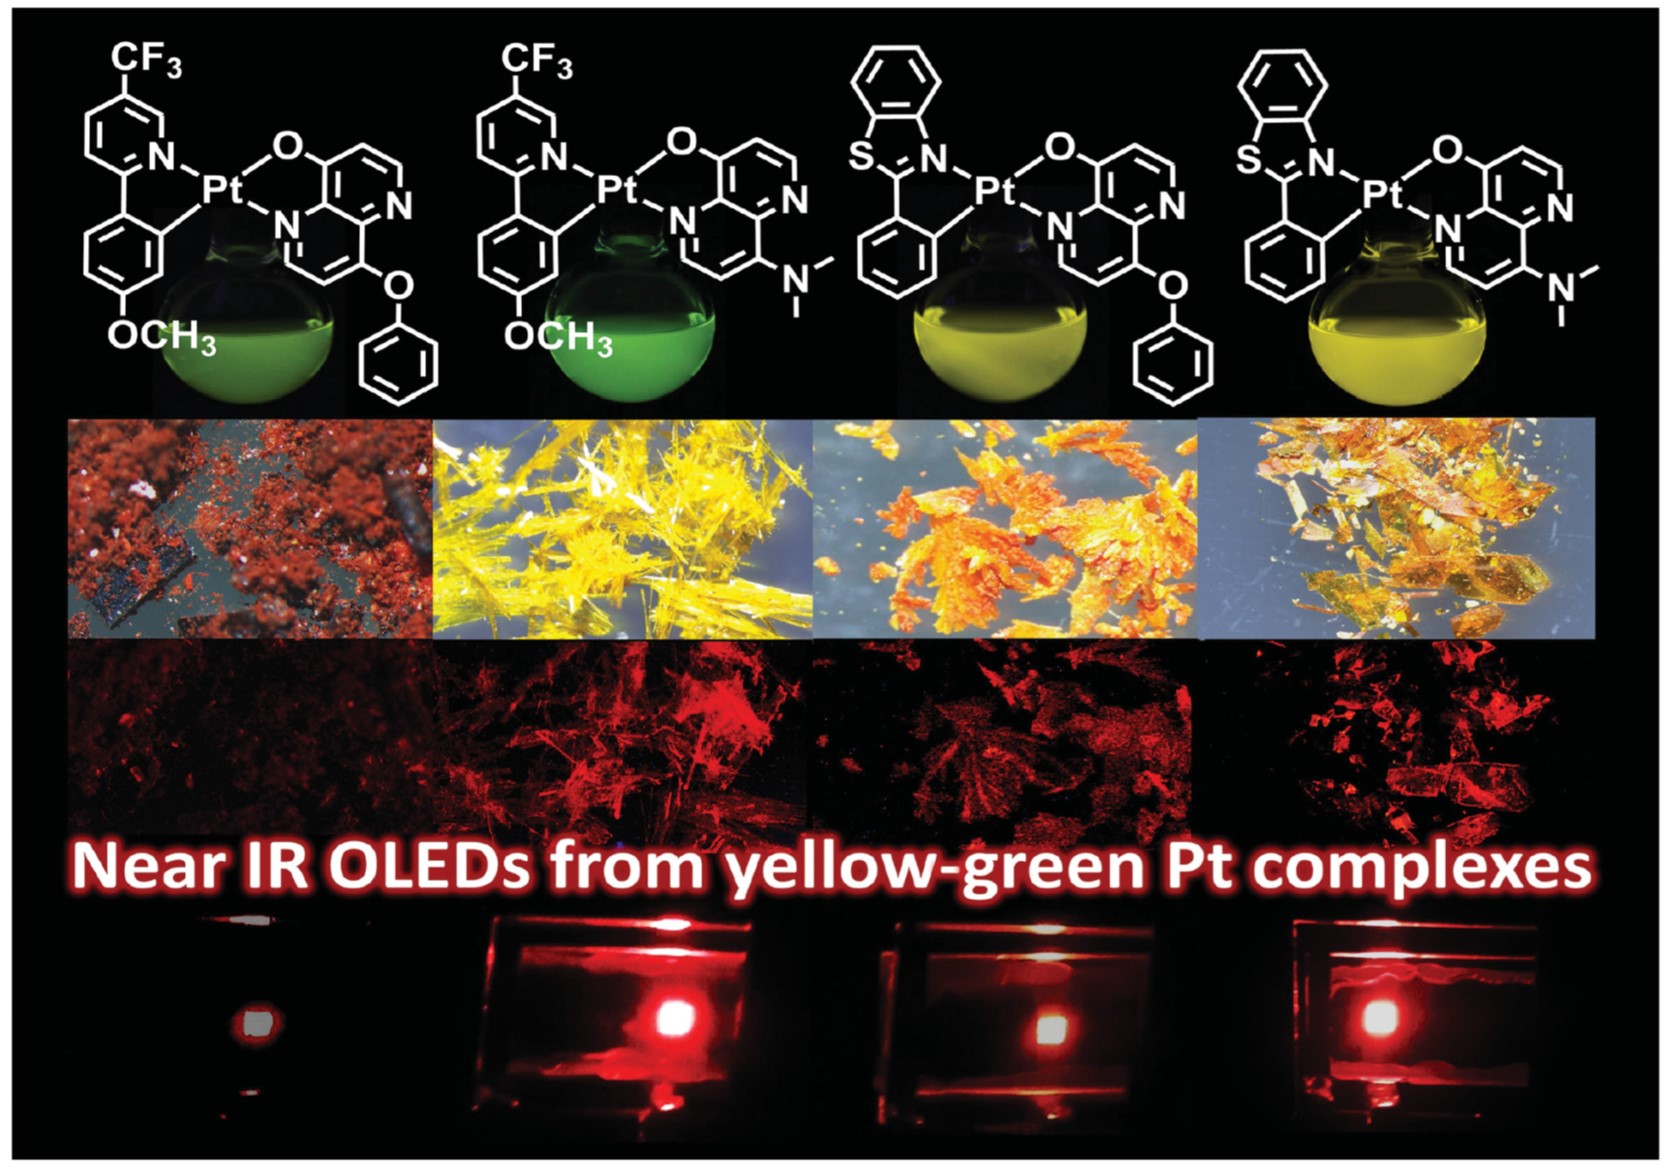 Near IR OLEDs from yellow-green Pt complexes